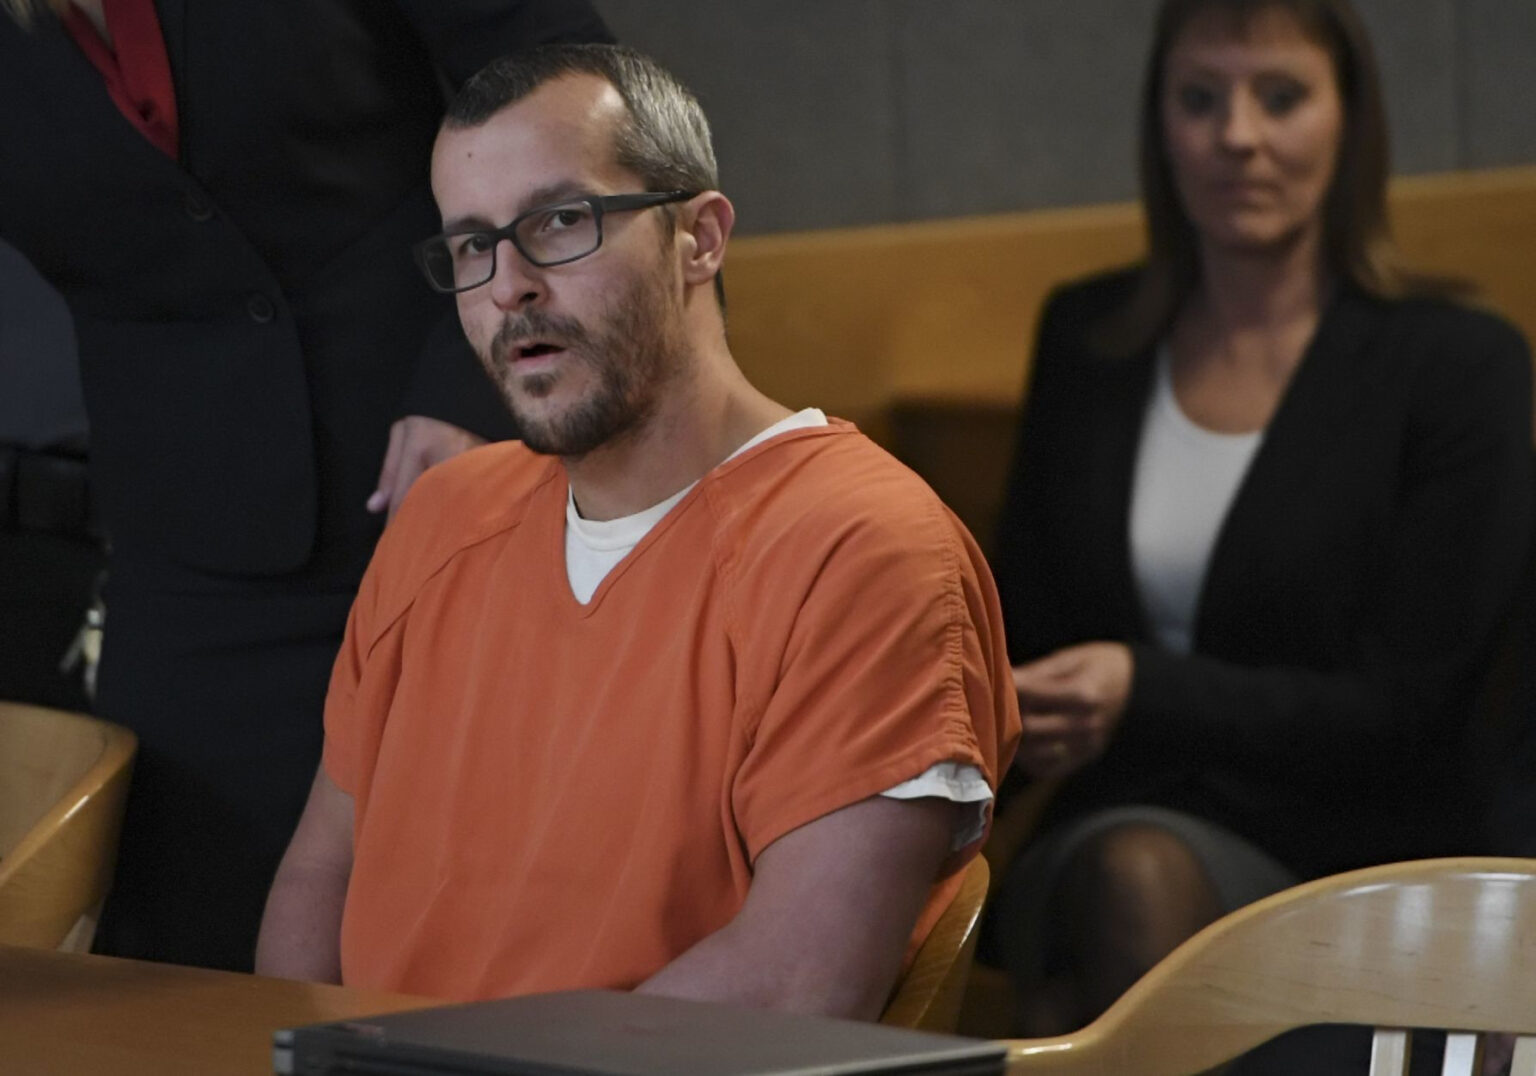 Was Chris Watts insane when he killed his pregnant wife and two children? Delve into what the experts are saying.